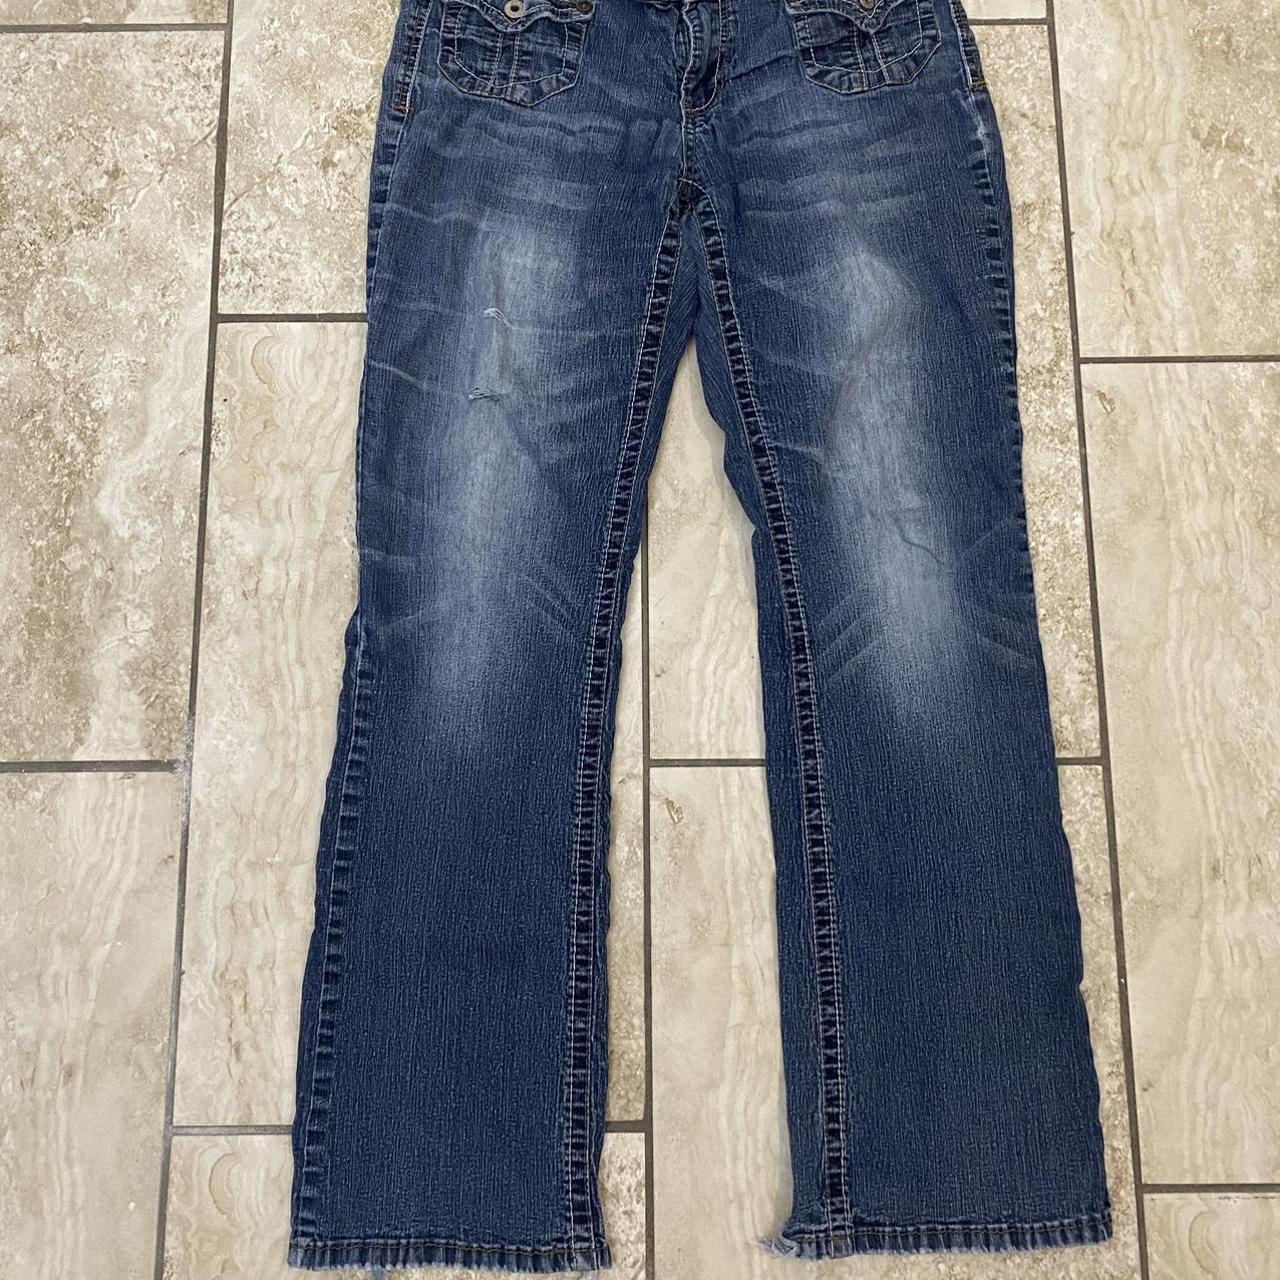 Cool jeans Womans i think NOT affliction - Depop